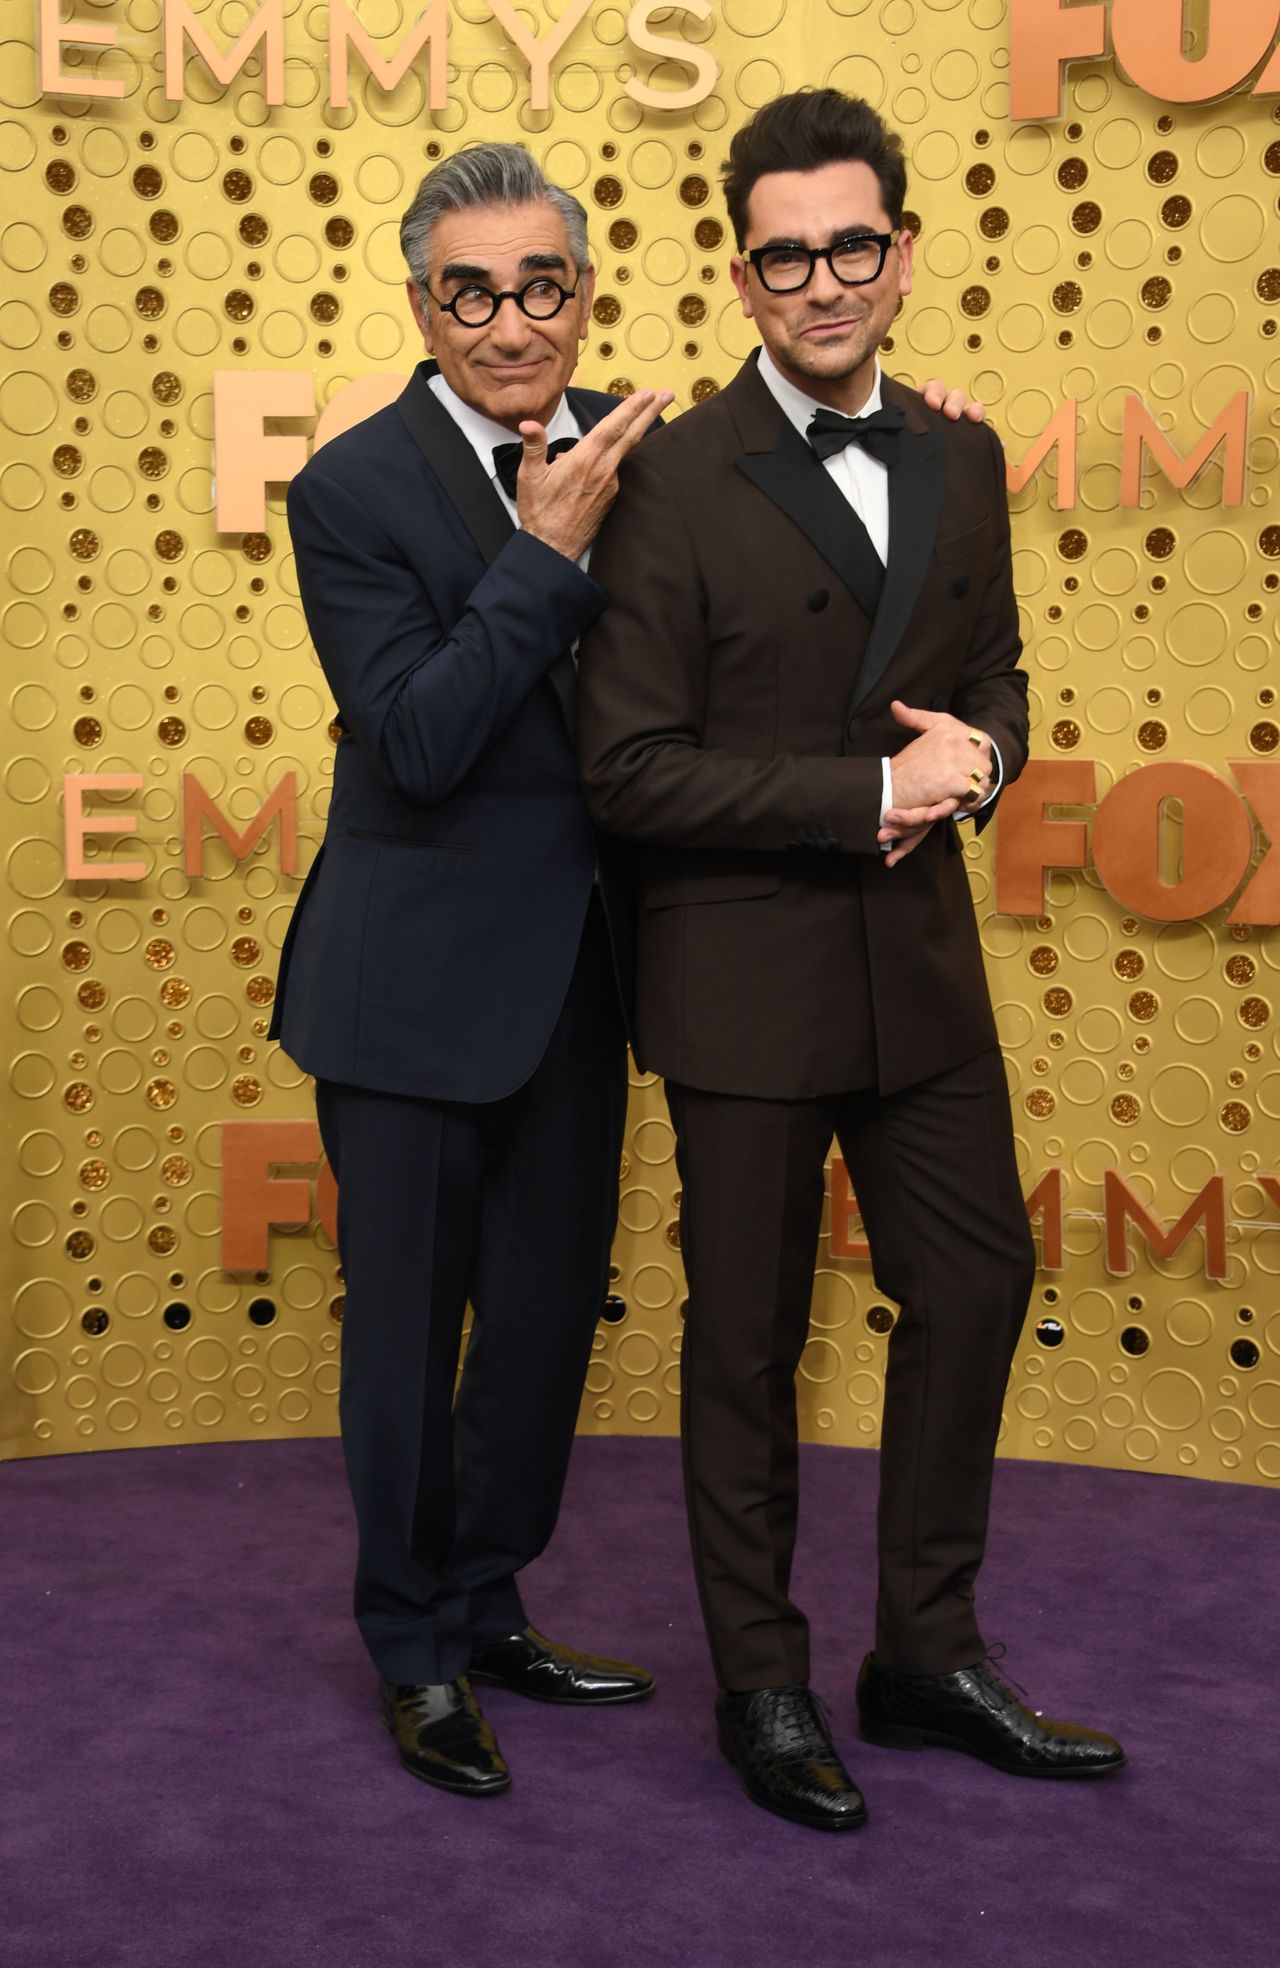 Left to right: Eugene Levy and his son Daniel Levy